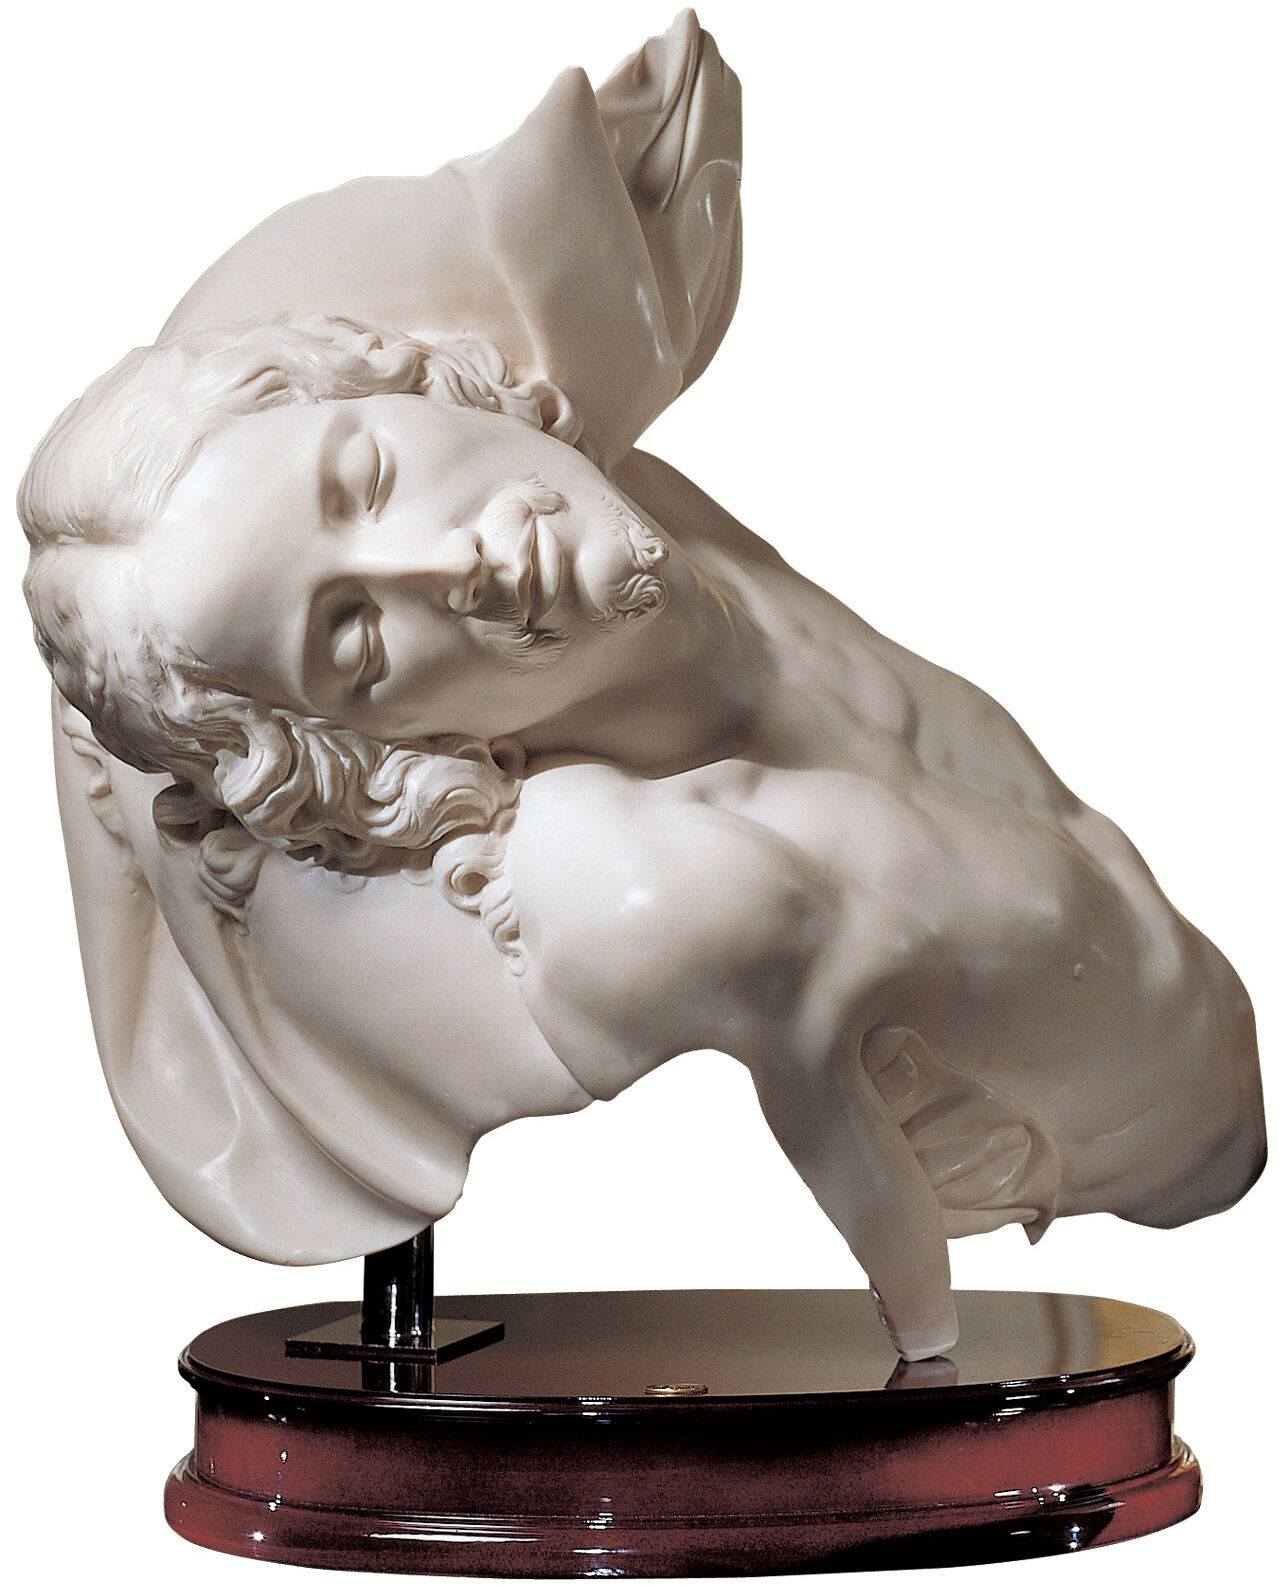 "The Bust of Jesus", artificial marble on wood by Ado Santini